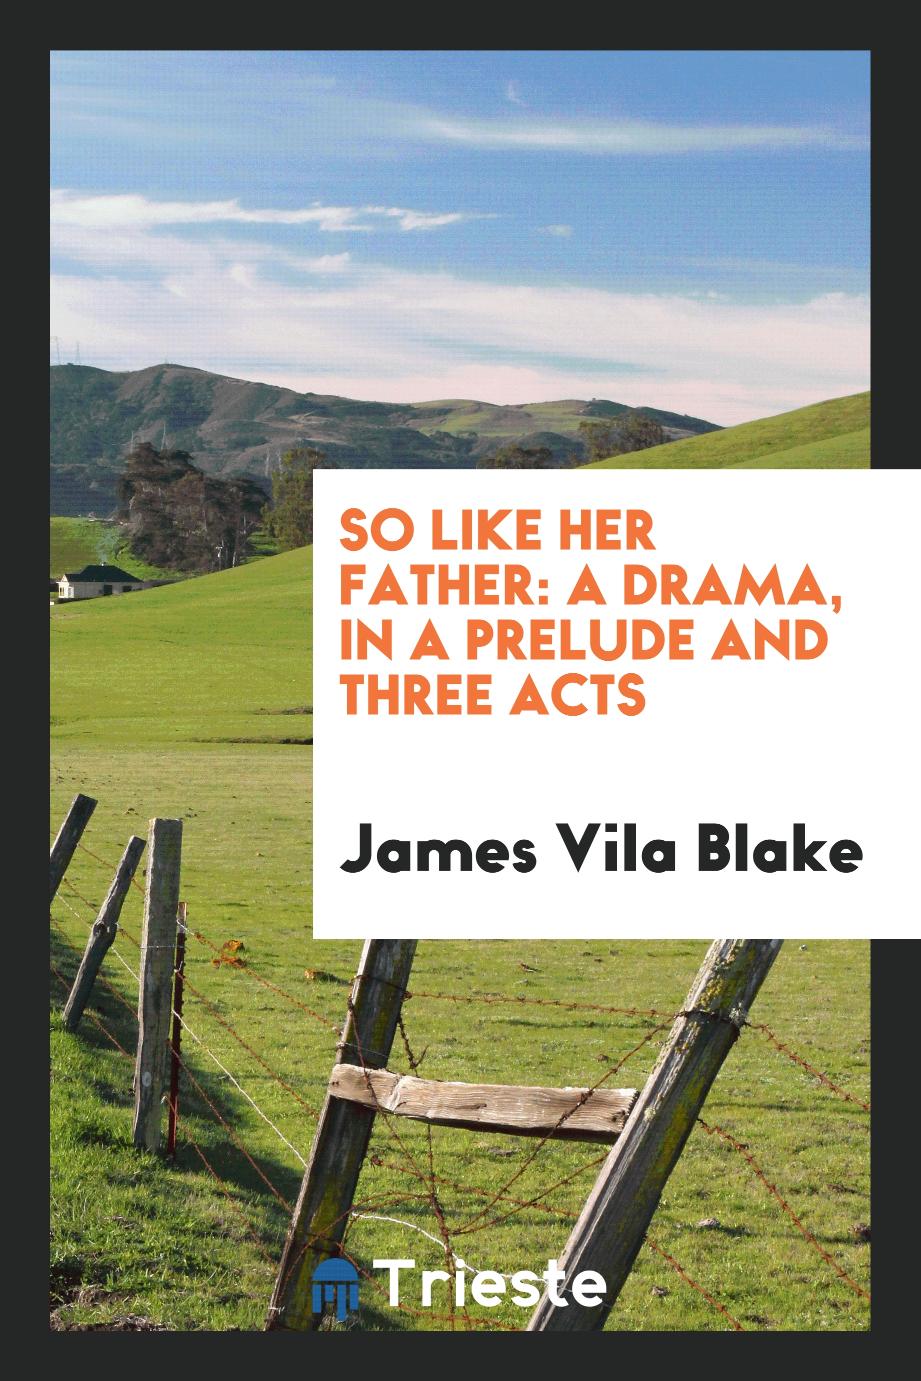 So Like Her Father: A Drama, in a Prelude and Three Acts